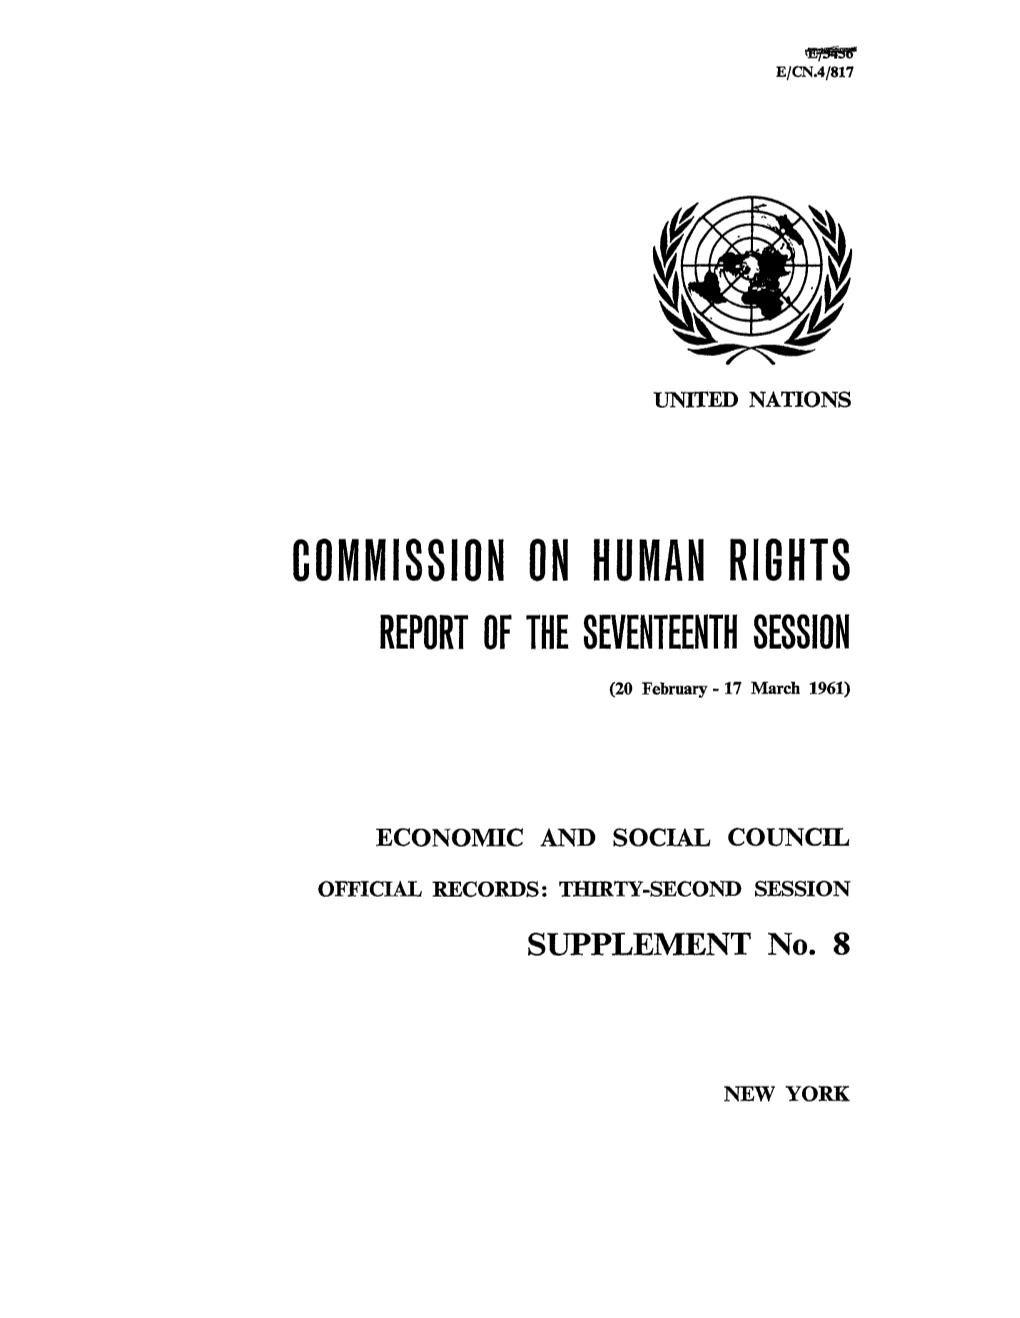 Commission on Human Rights Report of the Seventeenth Session